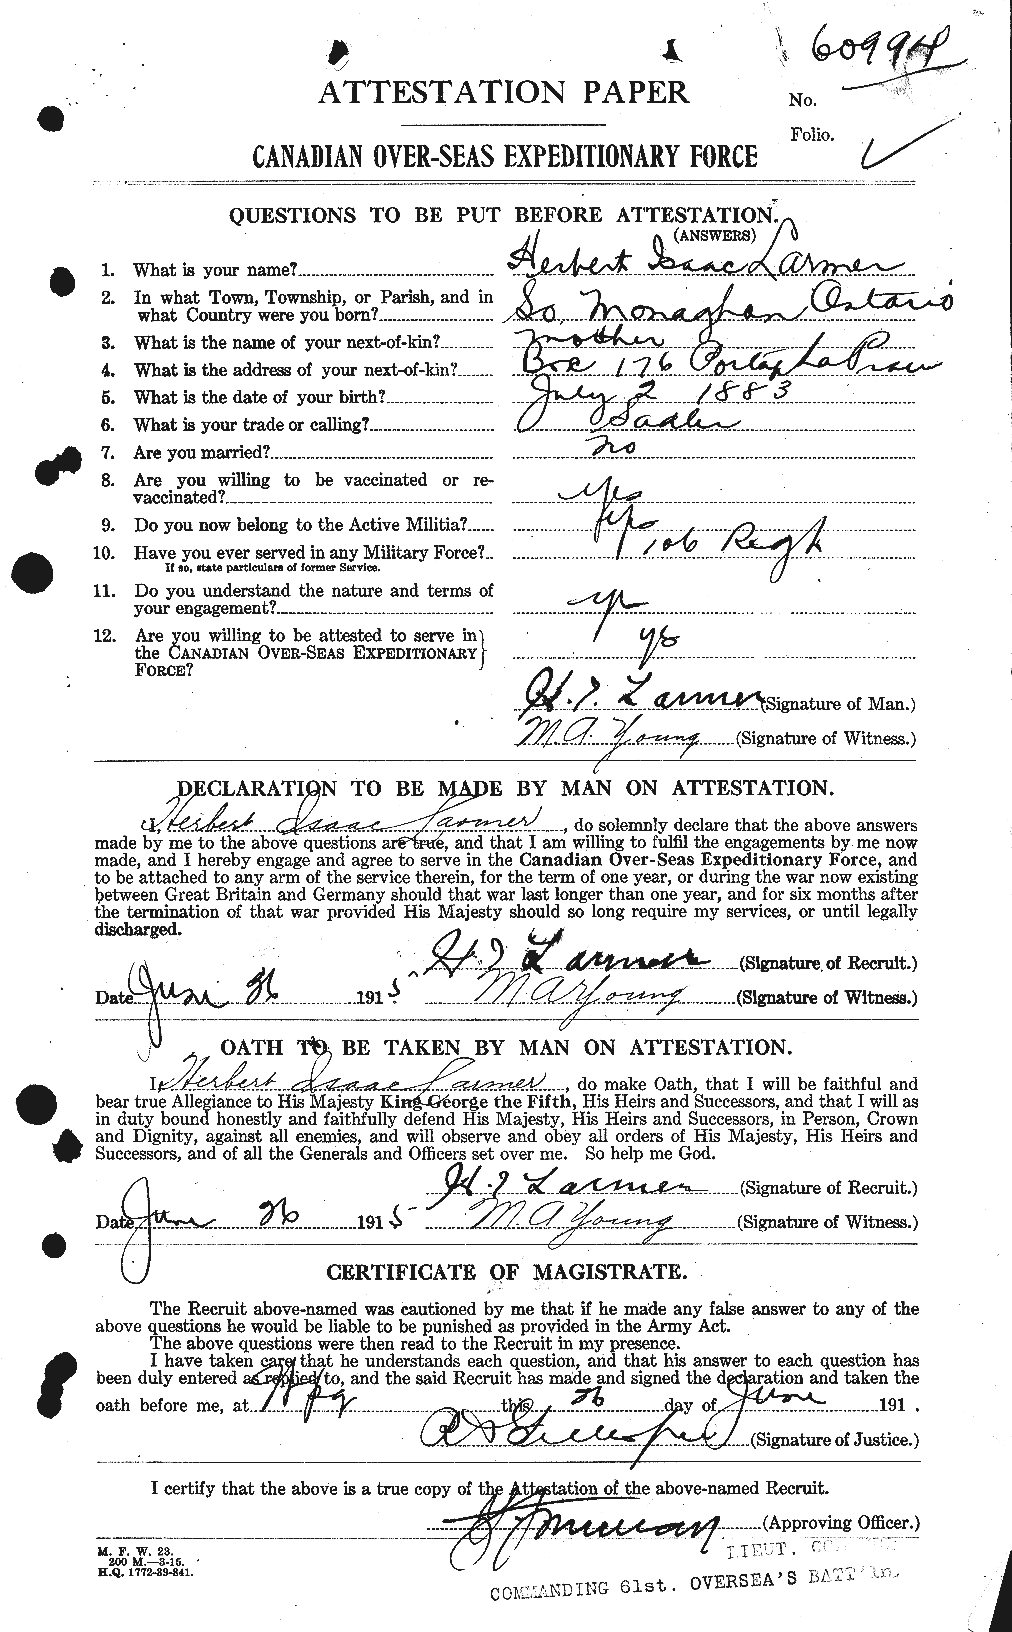 Personnel Records of the First World War - CEF 450638a